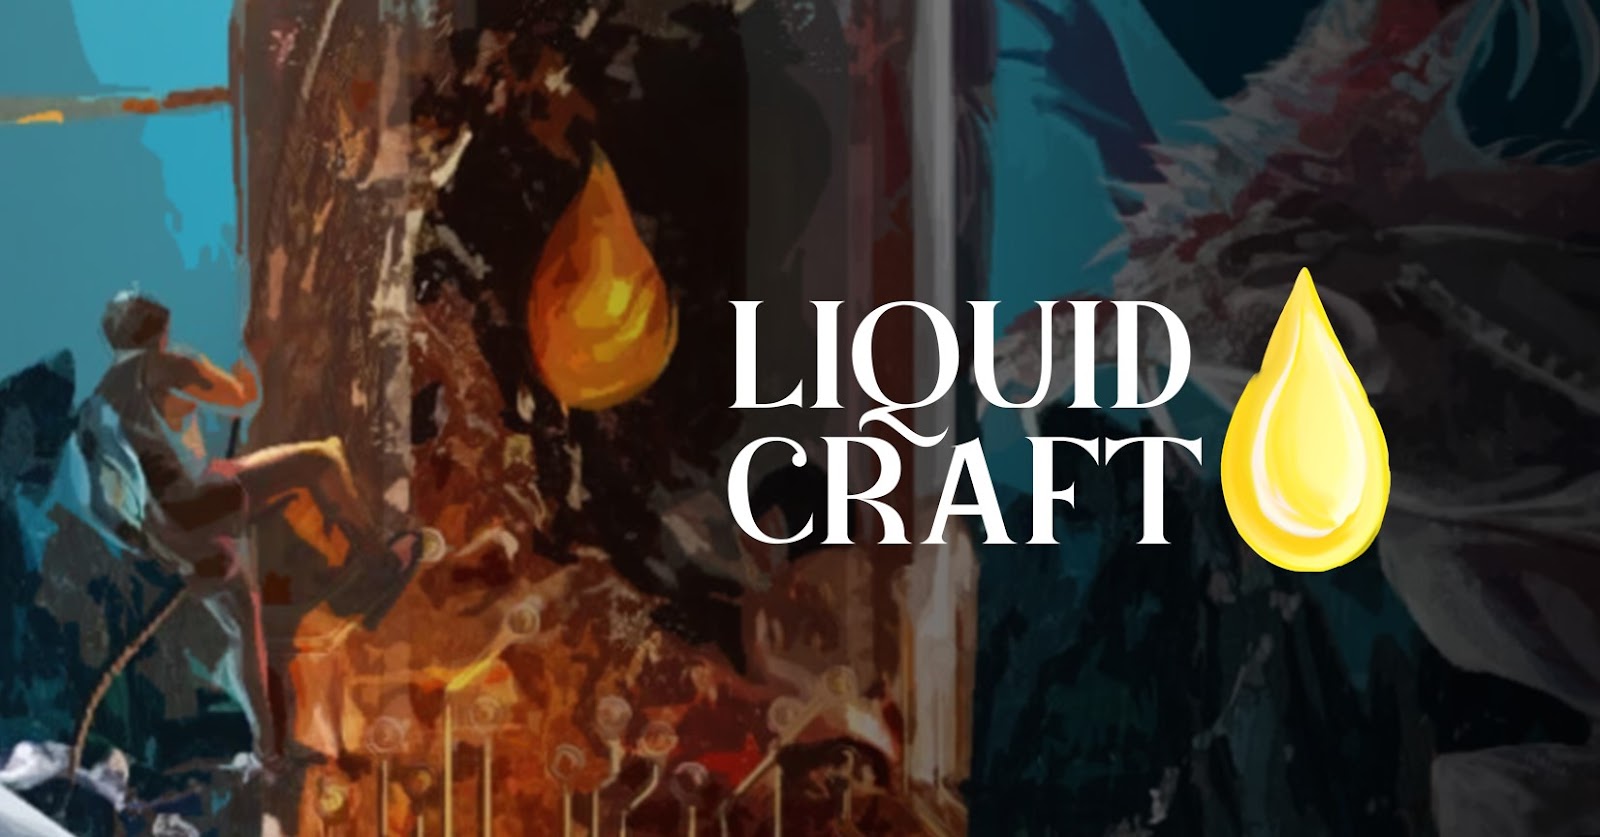 Liquid Craft to Launch 1500 Liquor Backed NFTs on ETH and BSC 23rd Nov